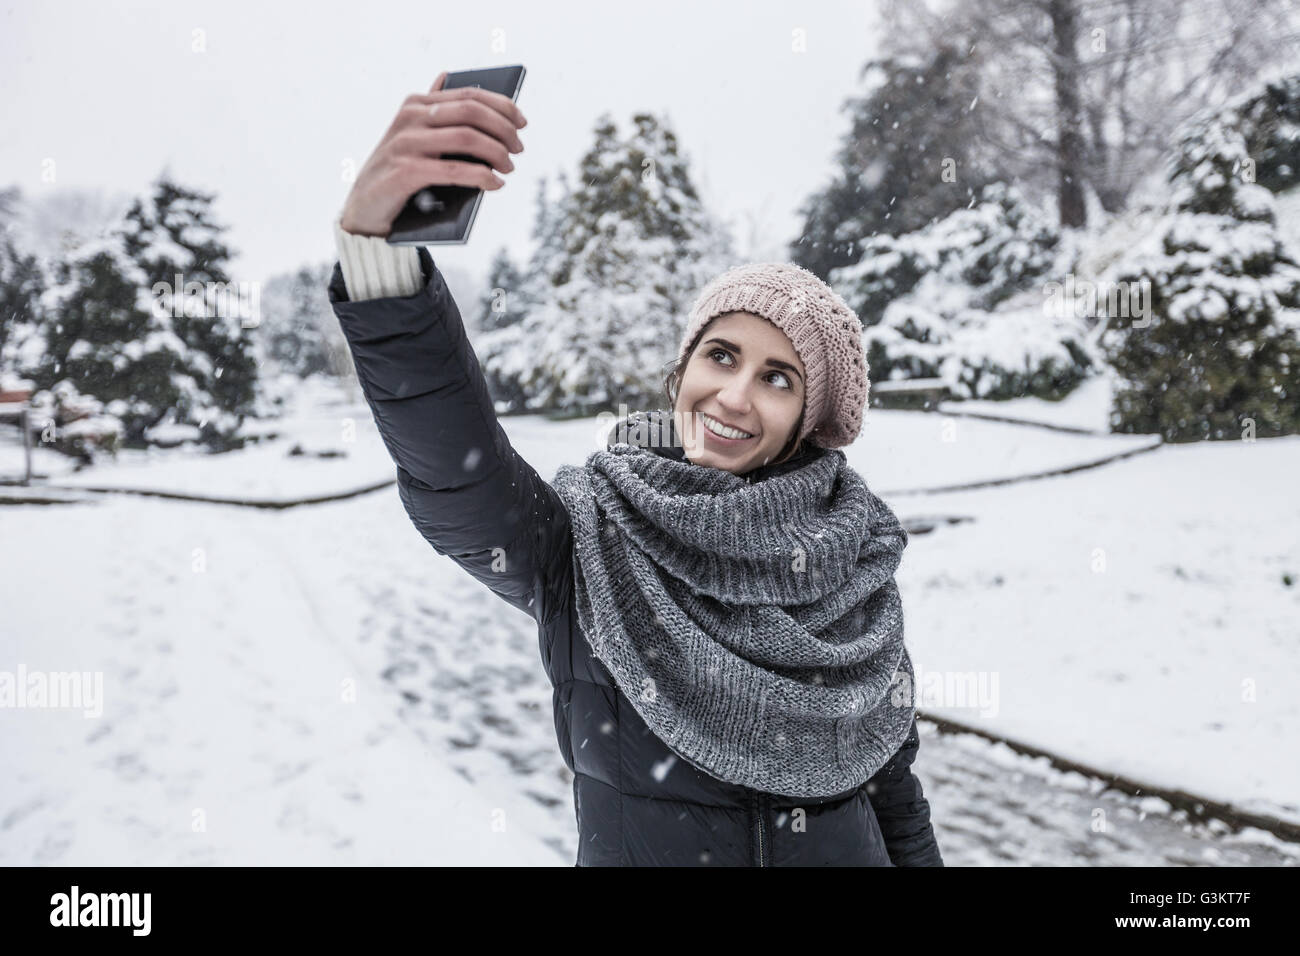 Woman on snow covered landscape using smartphone to take selfie Stock Photo